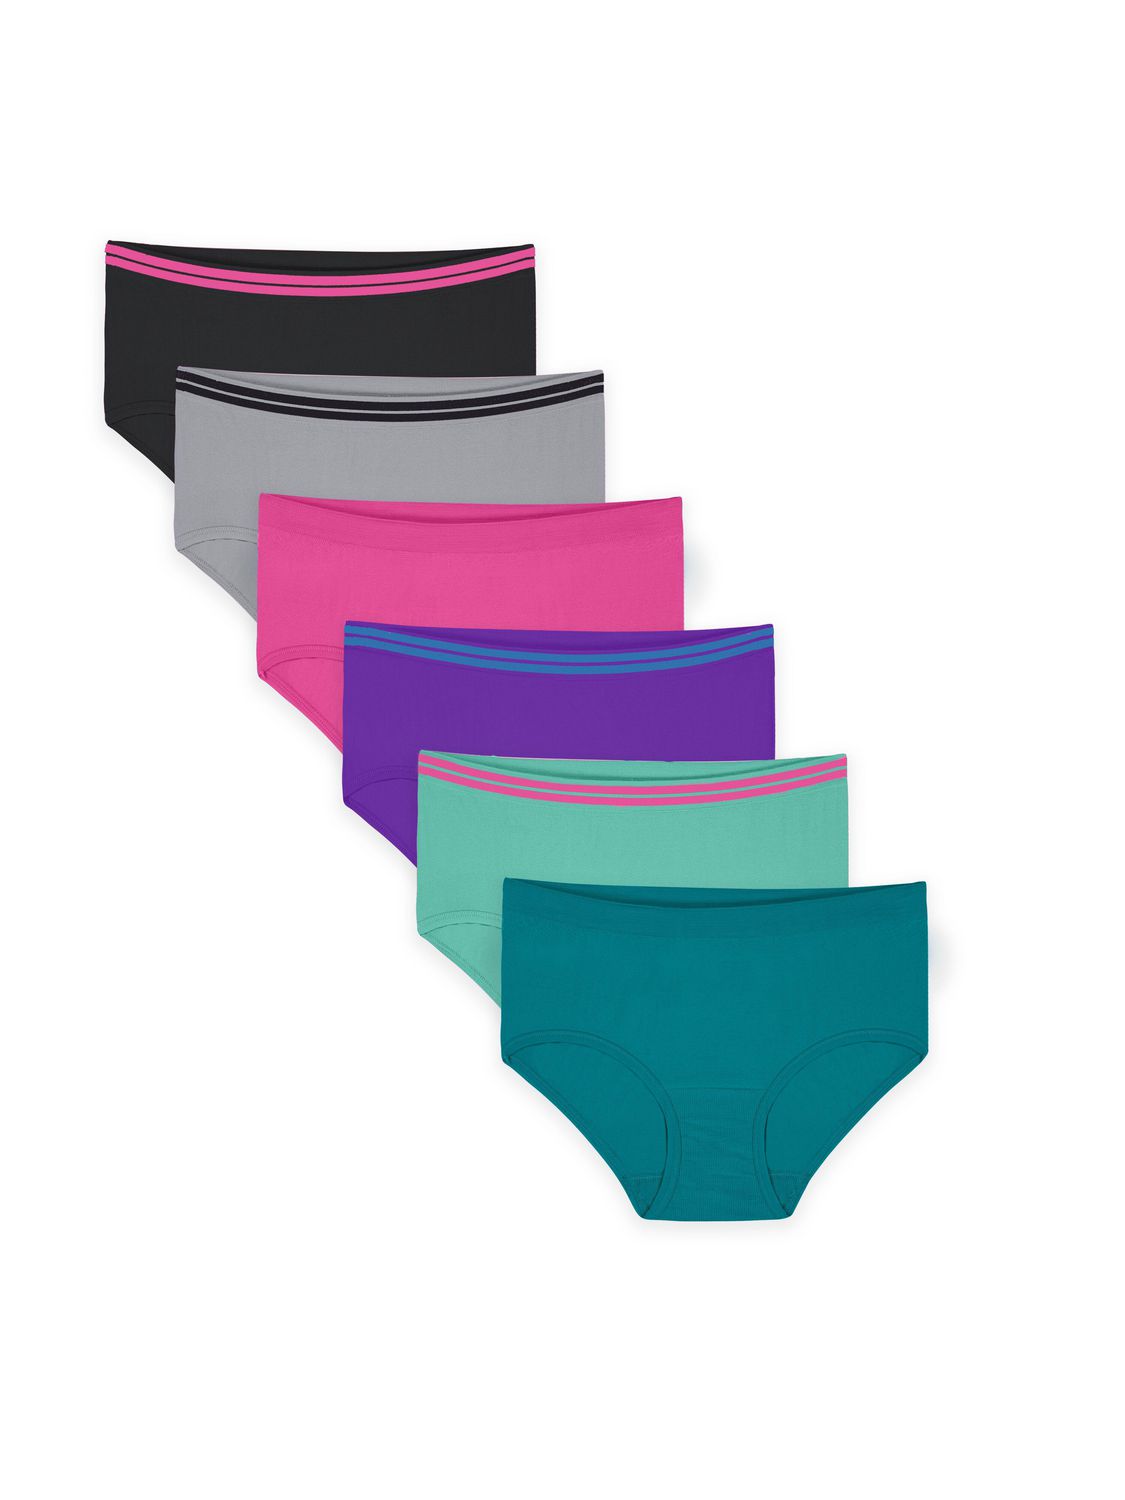 Fruit of the Loom Girls' Seamless Brief Underwear, 6-pack, Sizes 6